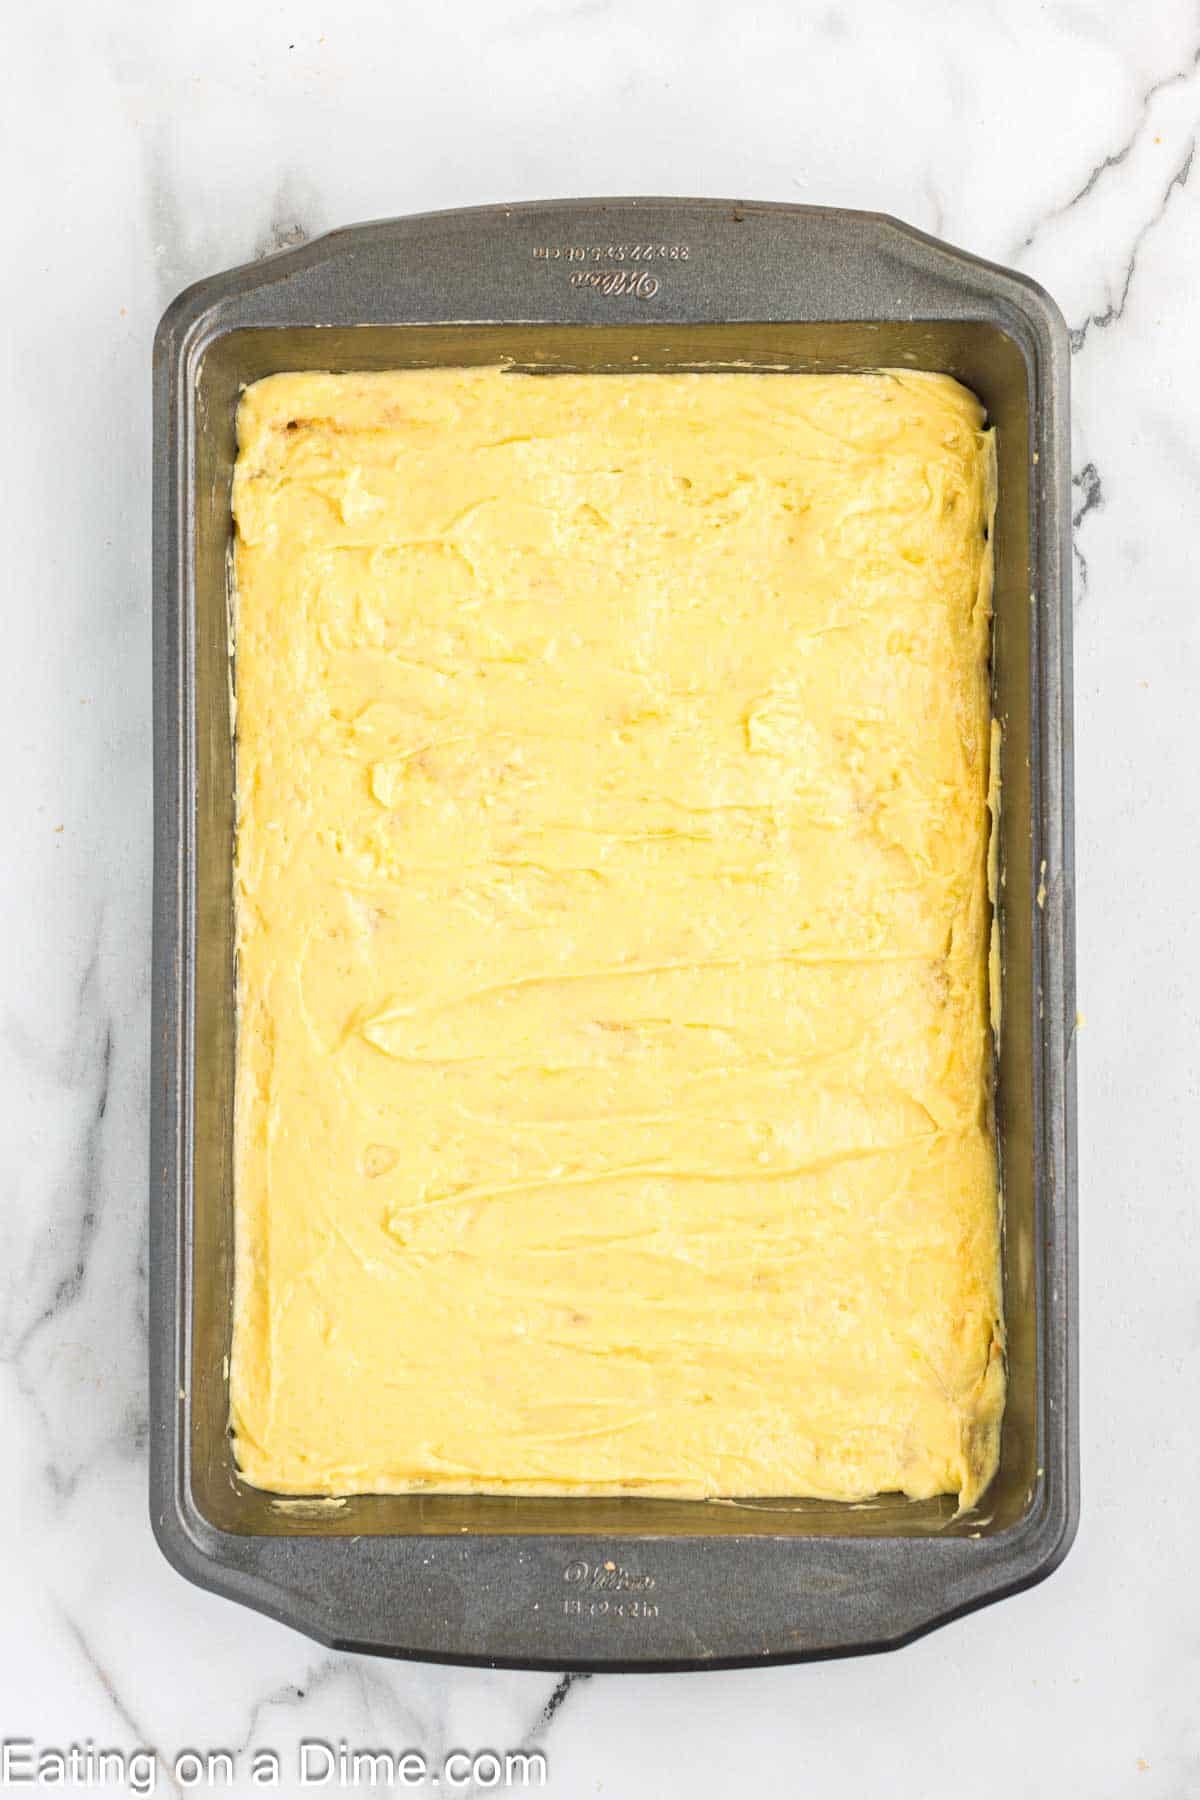 Cake batter spread in the baking dish